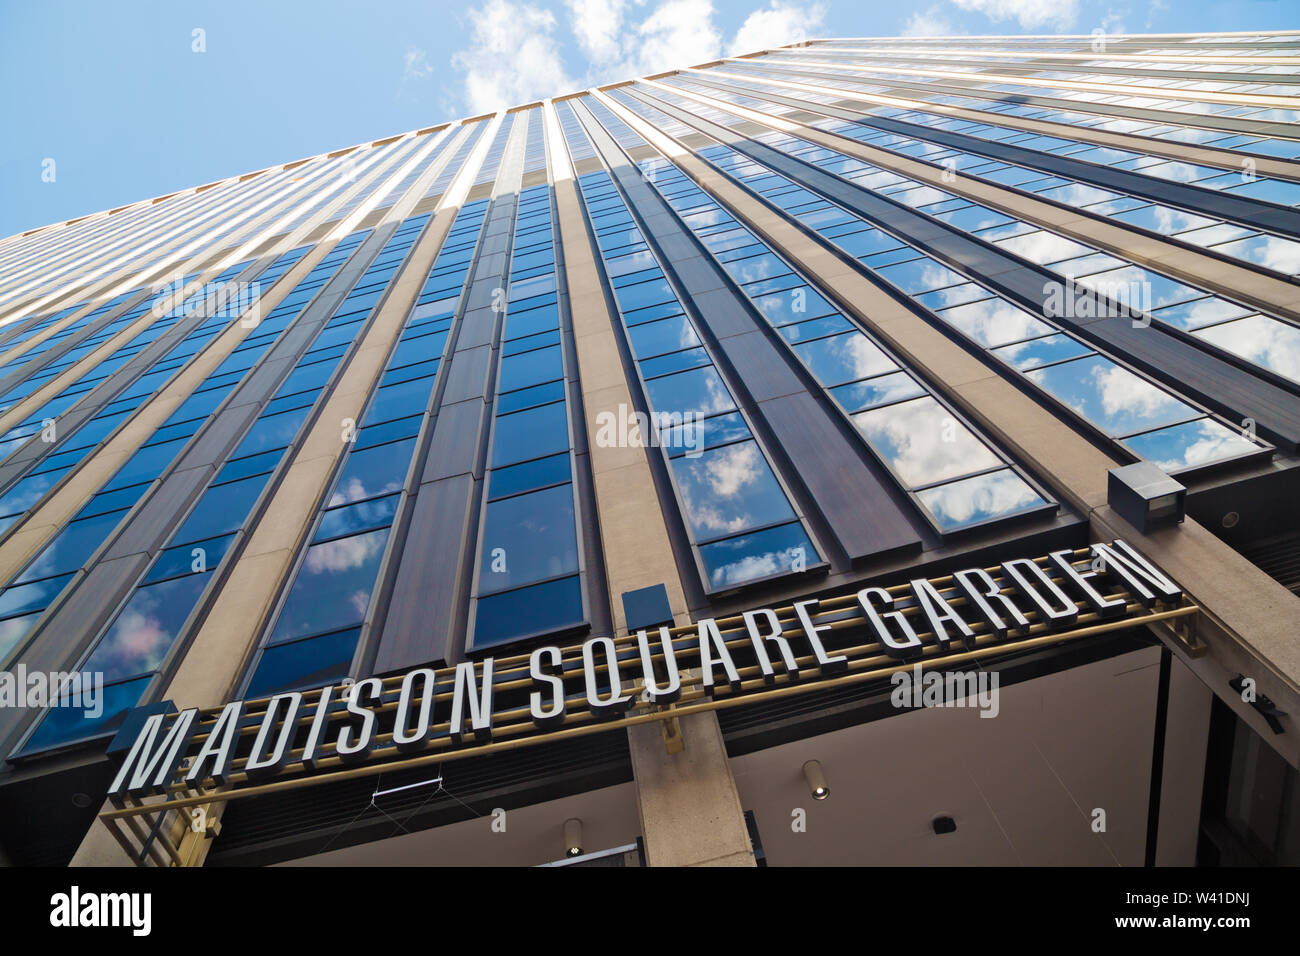 New York City - Circa 2018: Madison Square Garden Outside Marquee Banner  Advertising Knicks Basketball Game Stock Photo, Picture and Royalty Free  Image. Image 98449195.